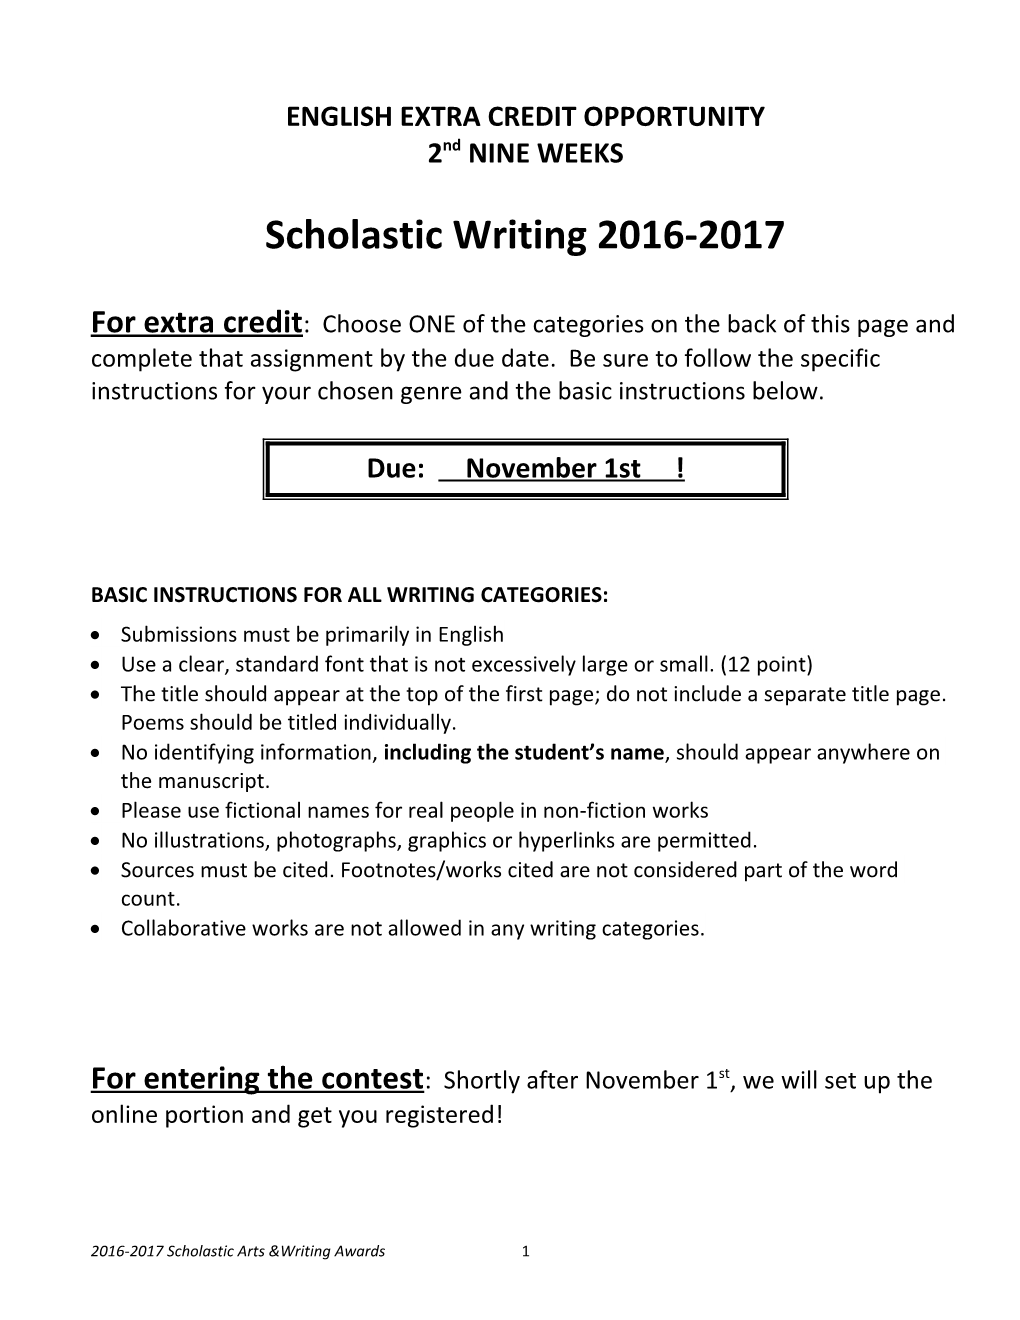 English Extra Credit Opportunity